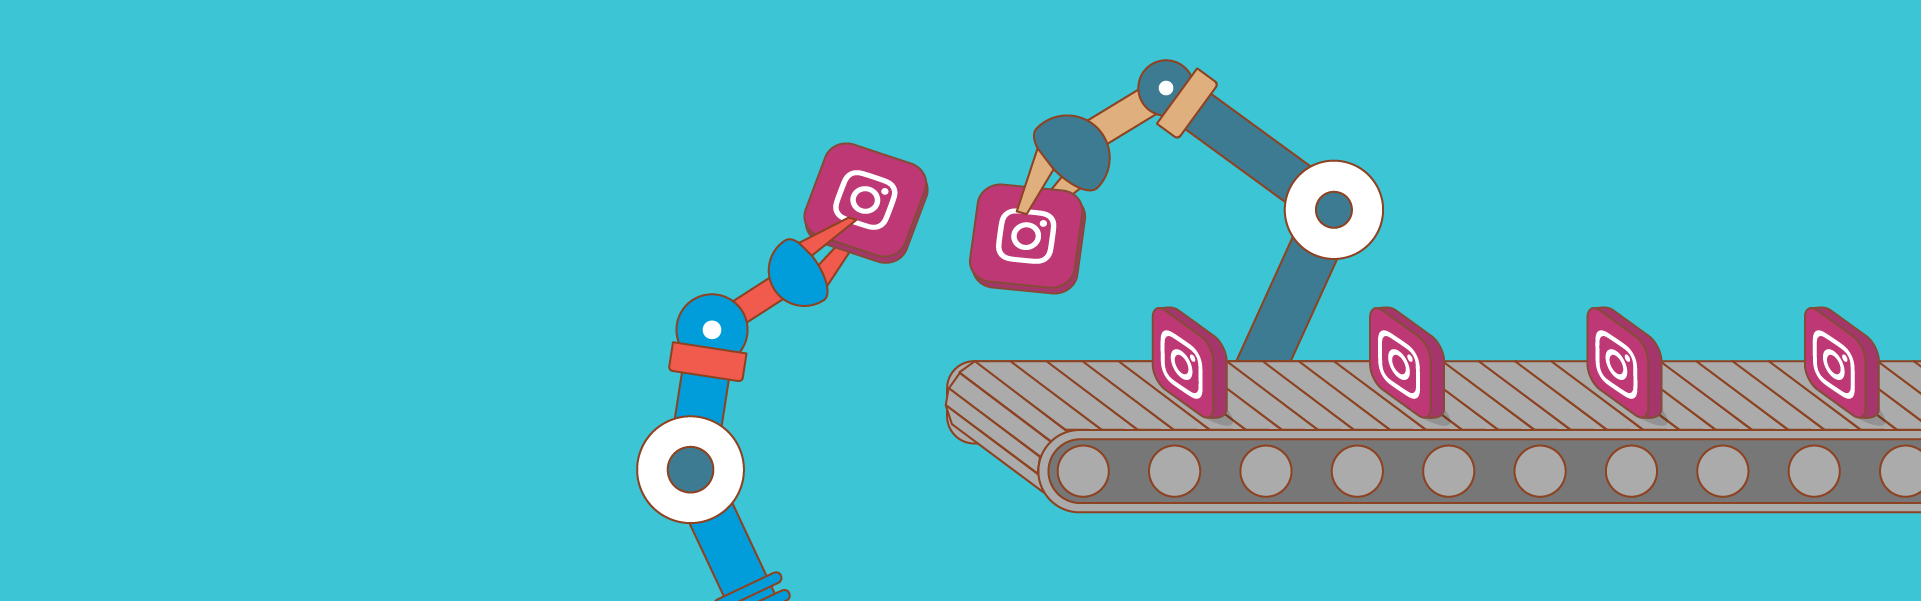 Instagram Automation and How to Use It